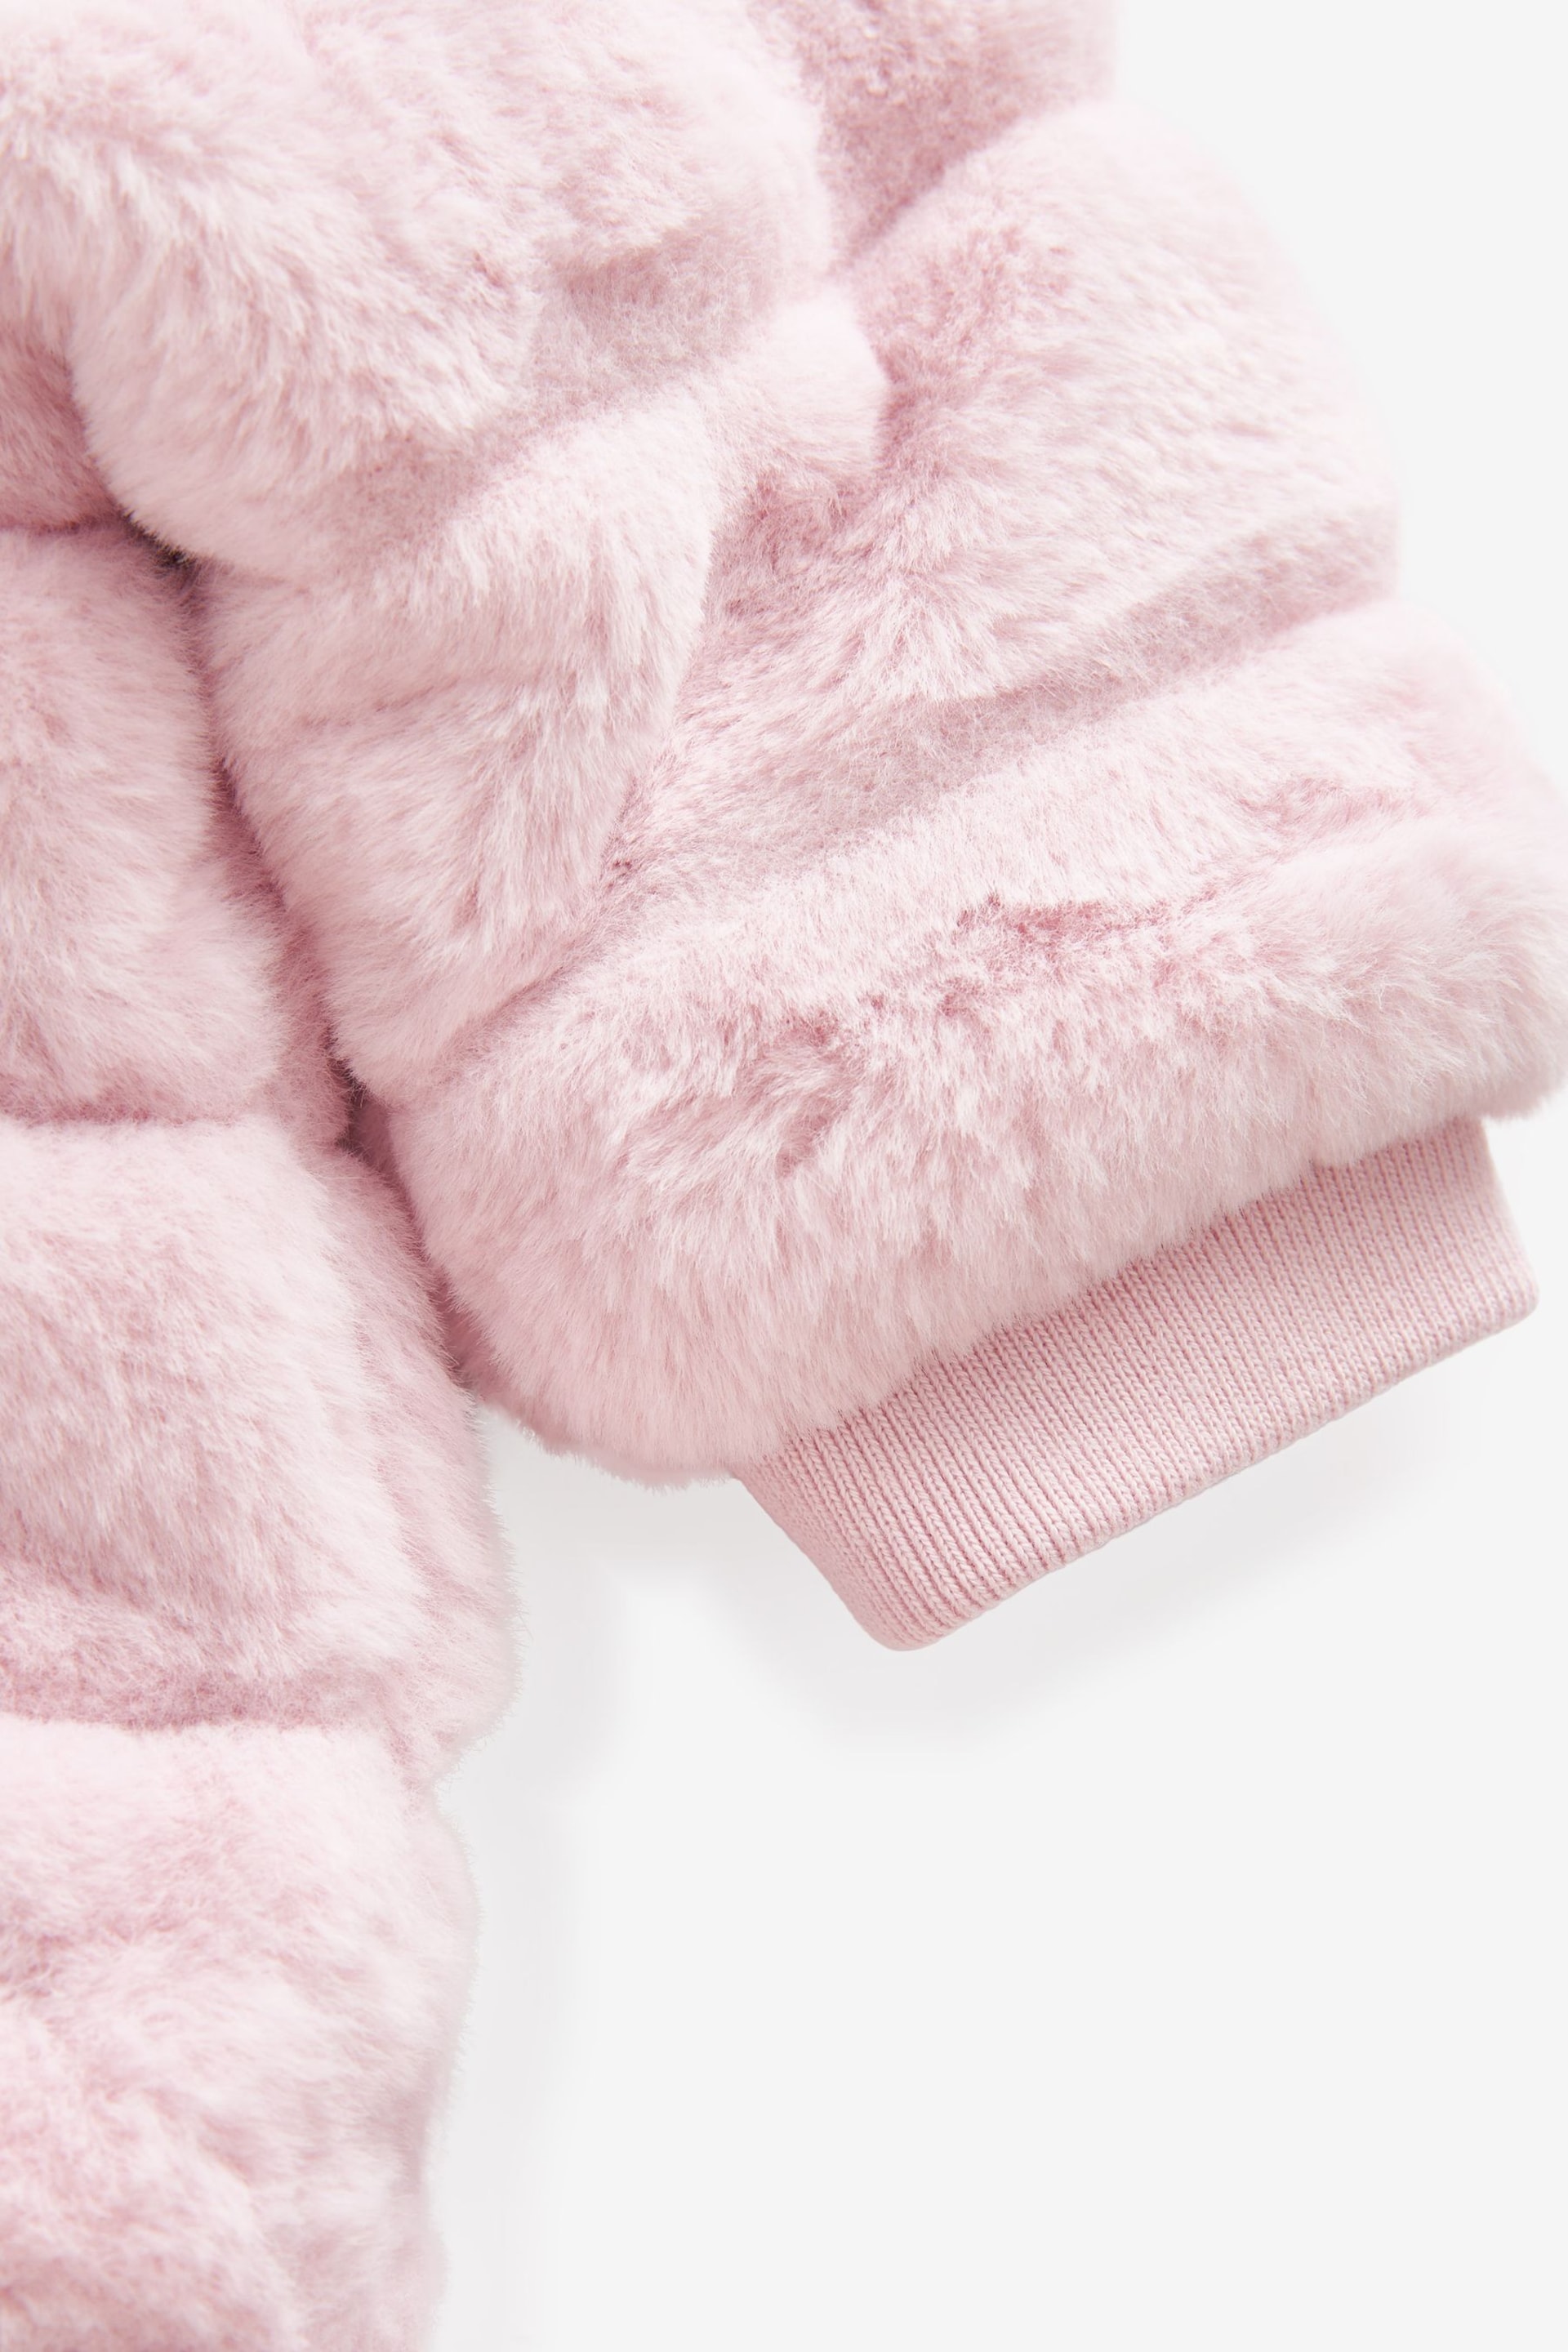 Baker by Ted Baker Fluffy Snowsuit - Image 7 of 8